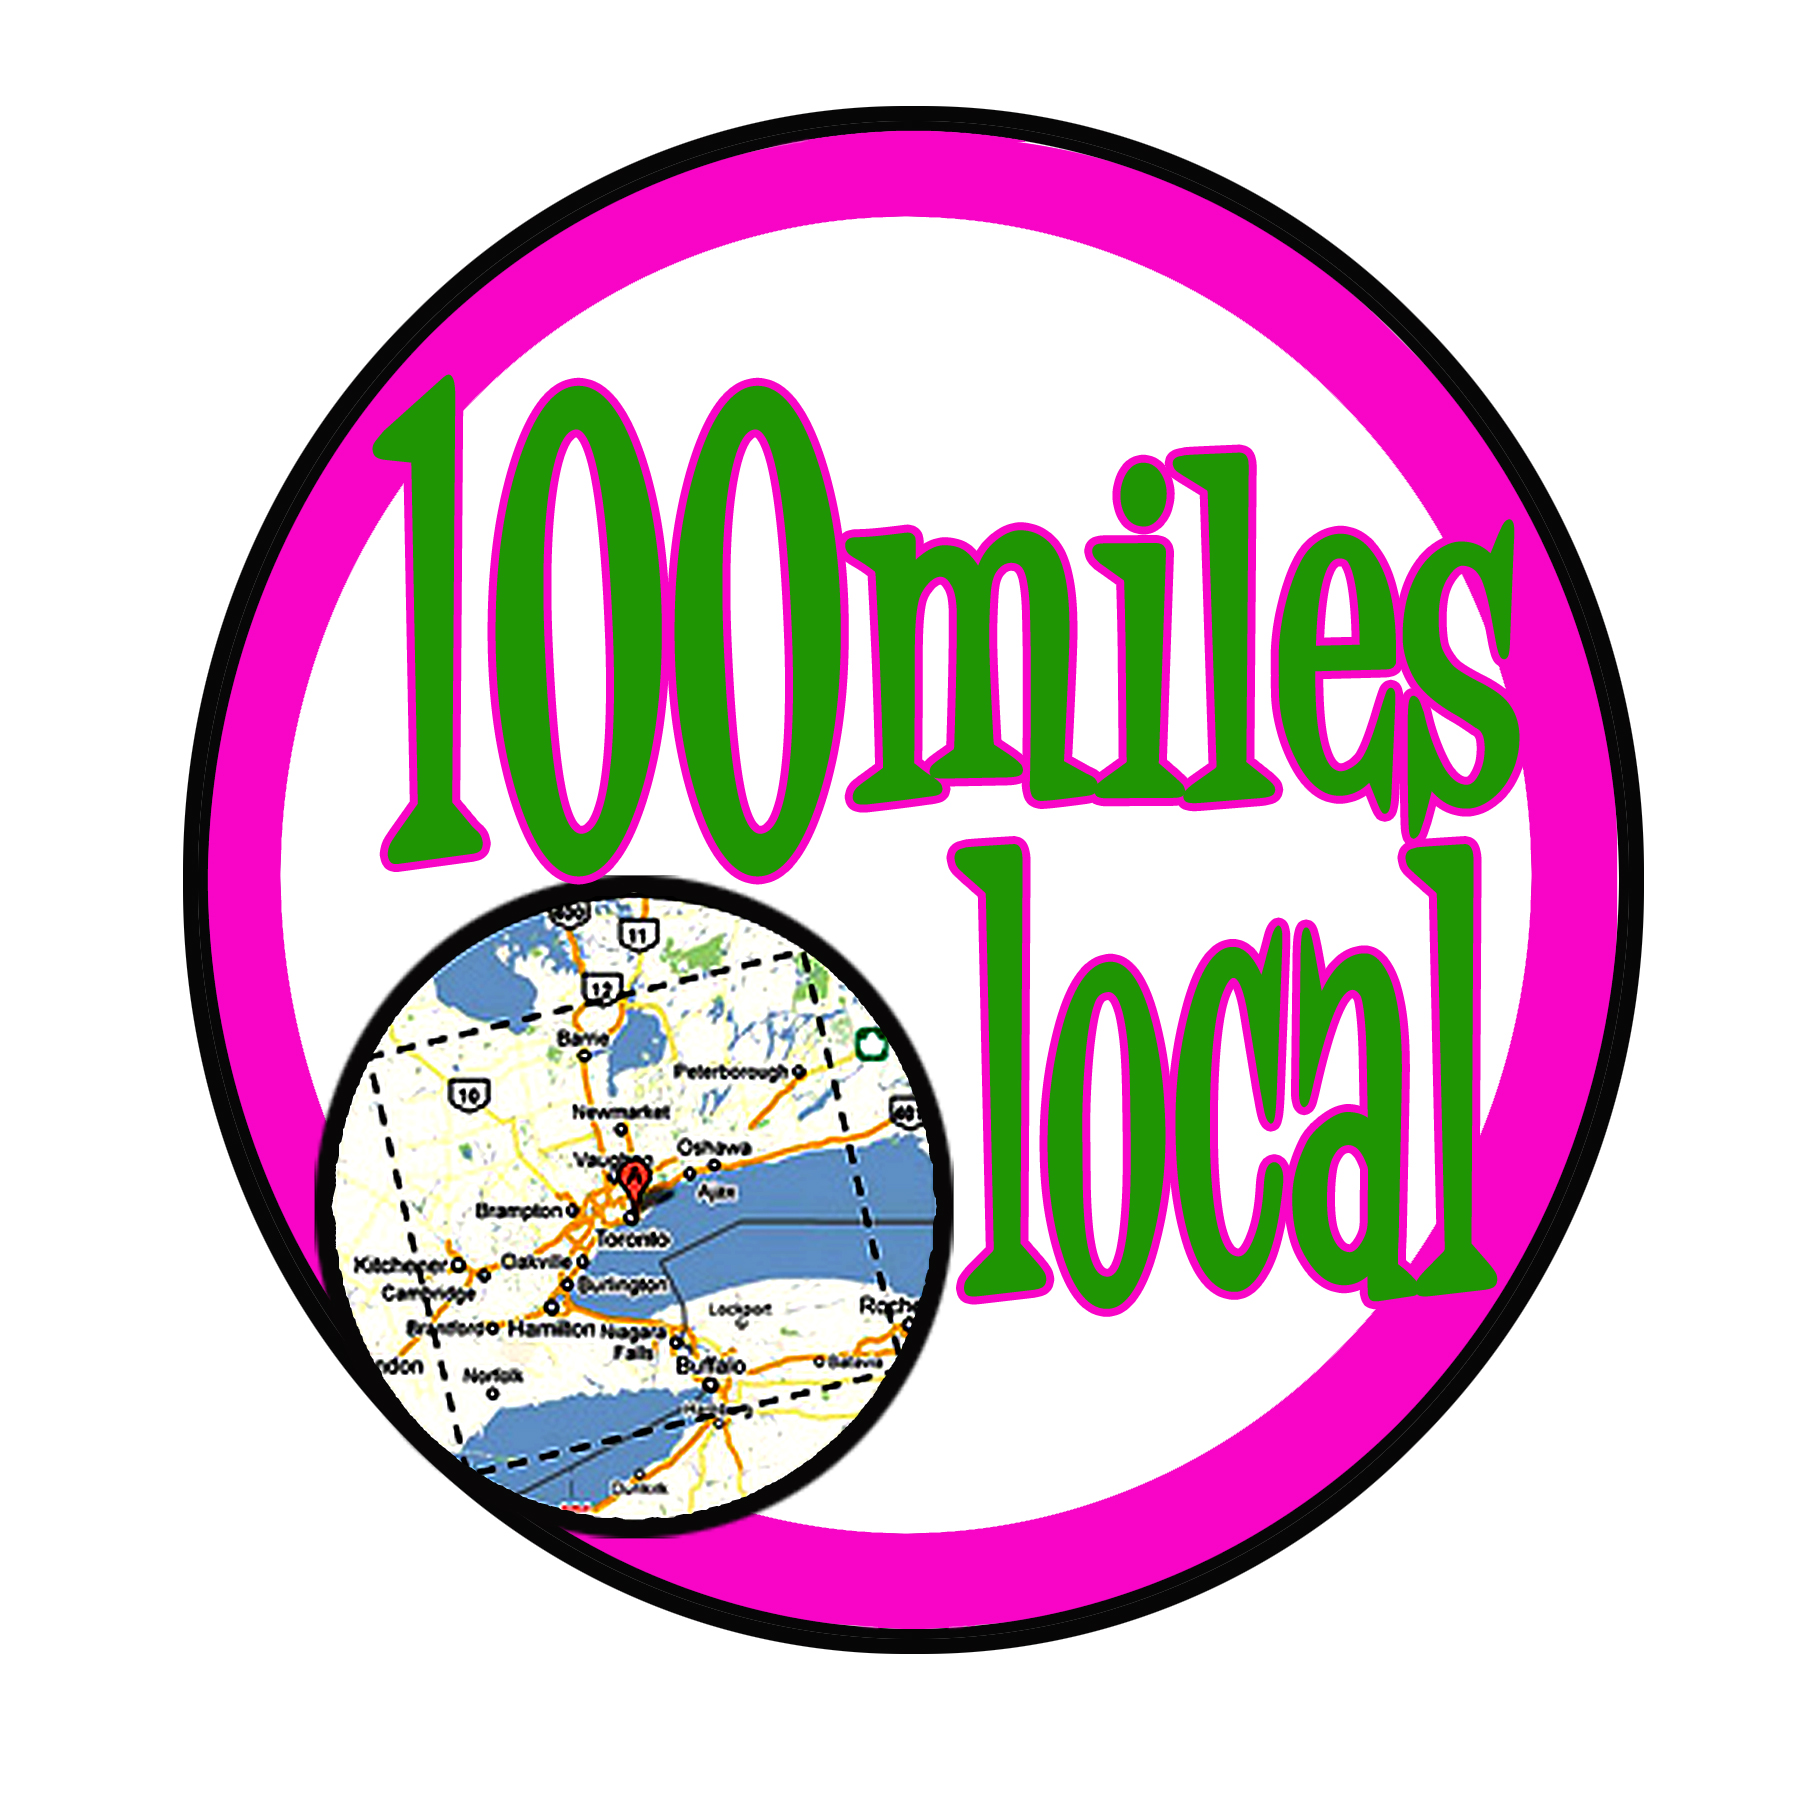 Logo for 100 mile local